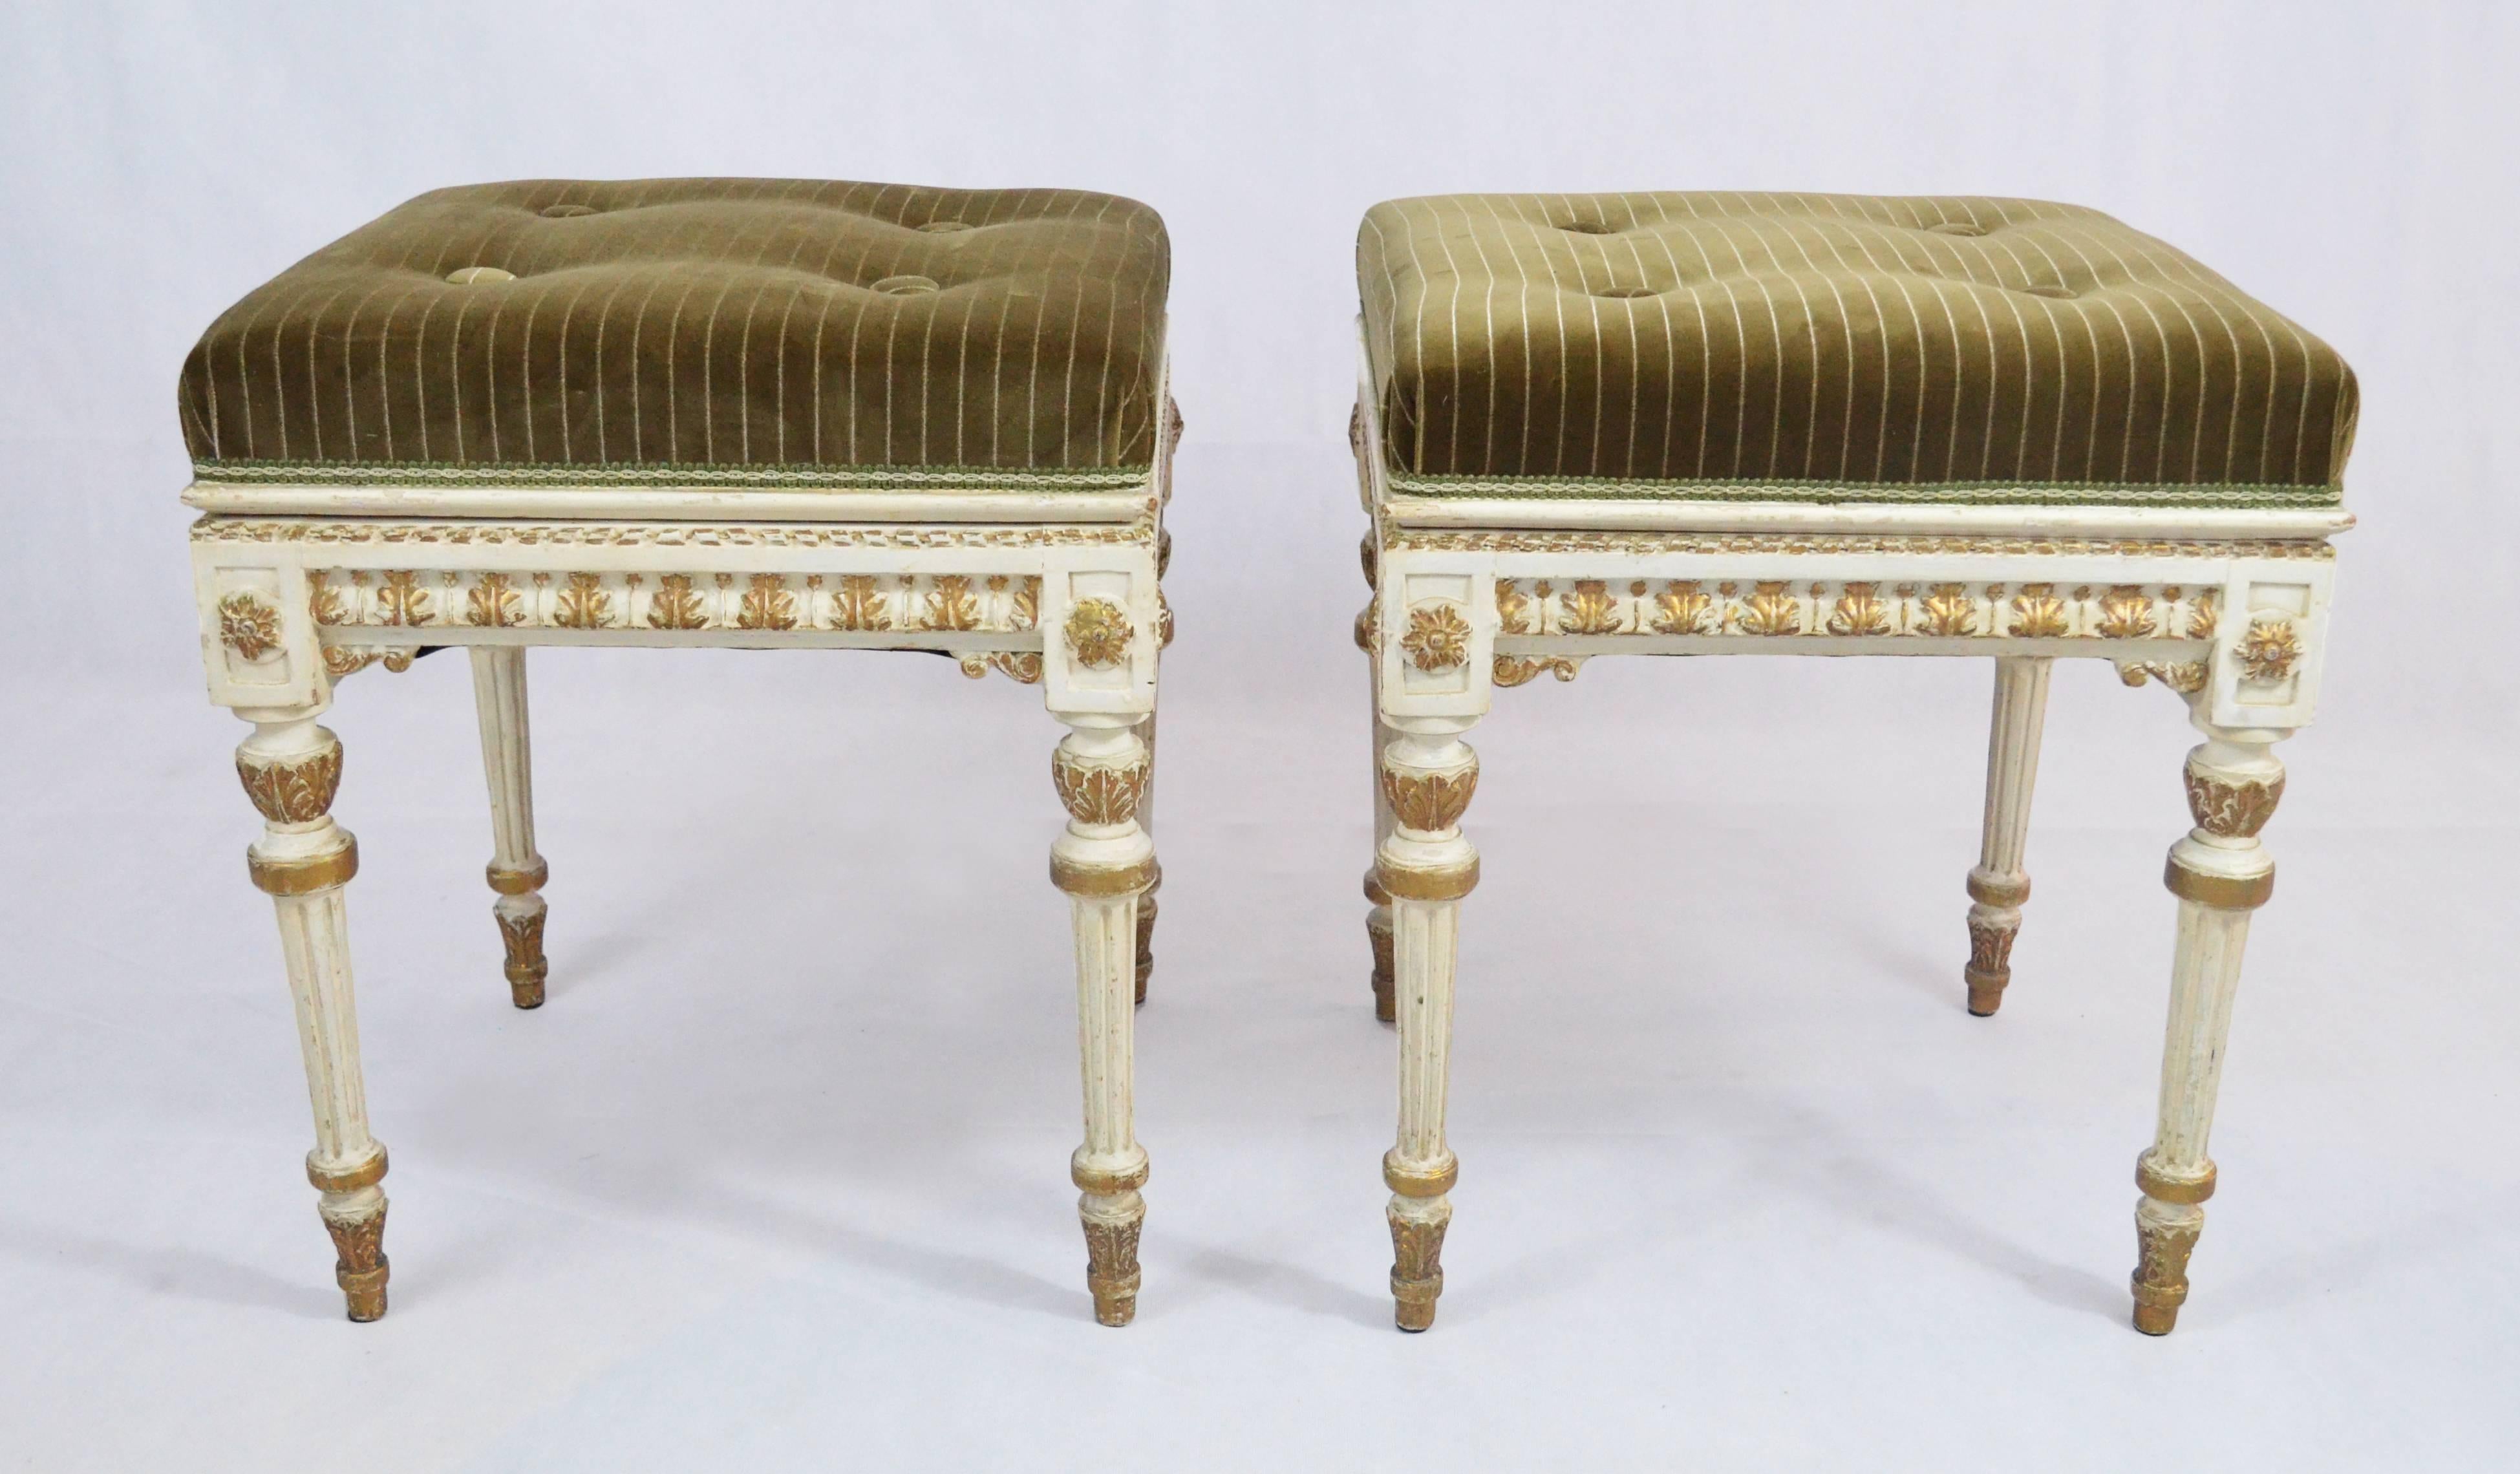 Two small carved wood, velvet seat, small benches. The carved wood is still in its original lacquer on the style of Louis XVI. We replaced the old velvet and padding. No additional restore was necessary.
Each small pouf measure 45cm/W. and